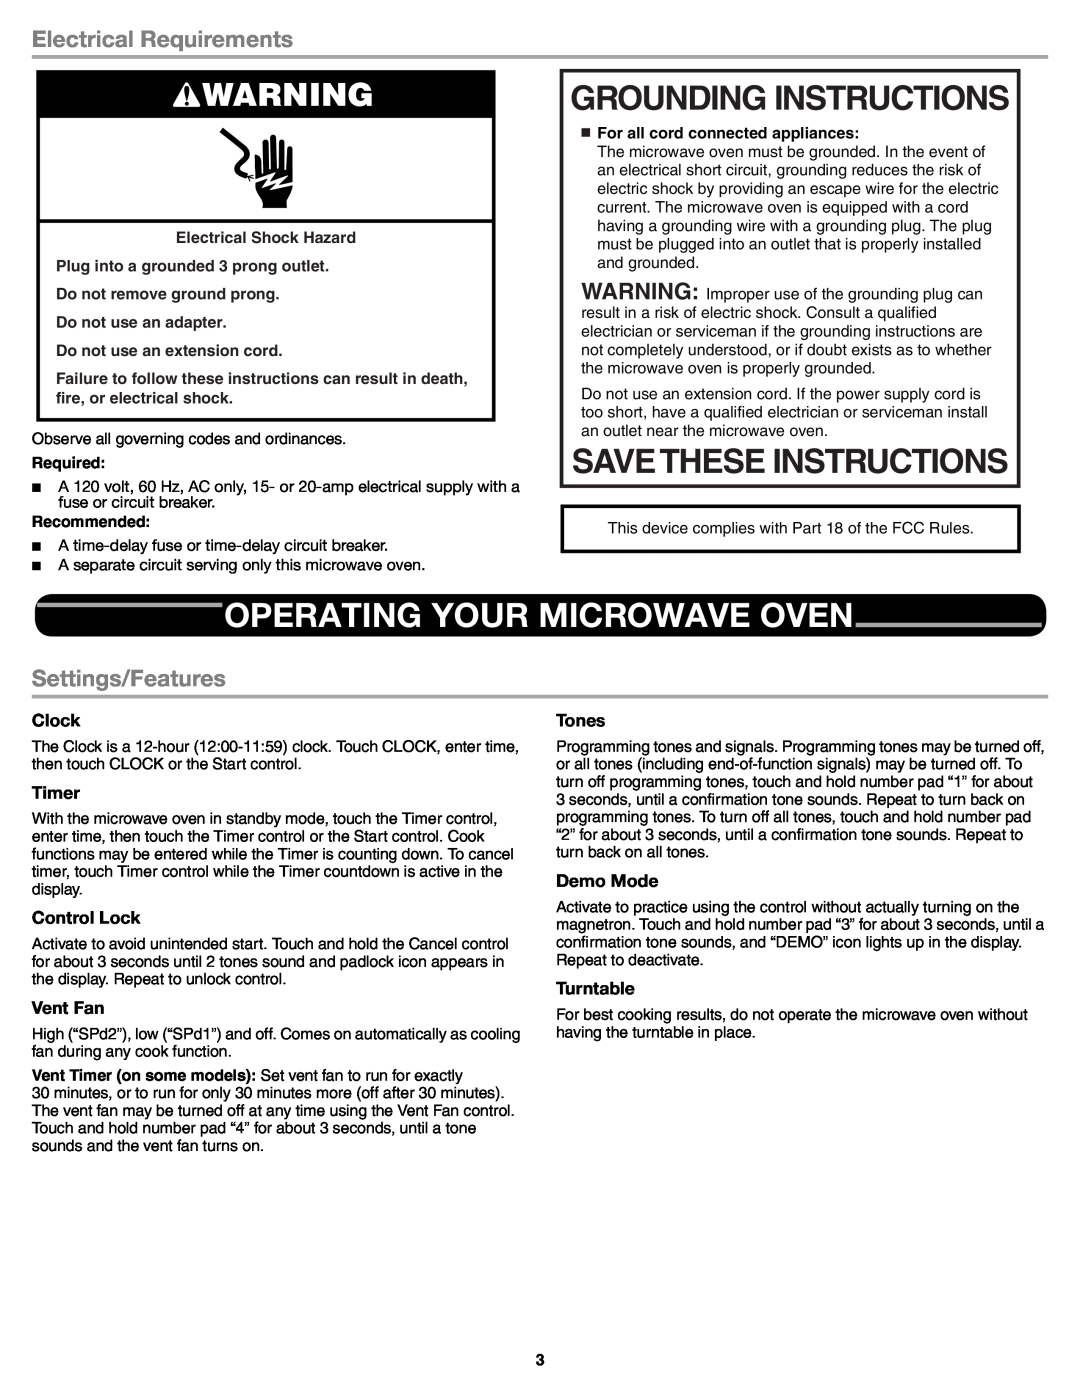 Whirlpool WMH31017AB Grounding Instructions, Operating Your Microwave Oven, Electrical Requirements, Settings/Features 